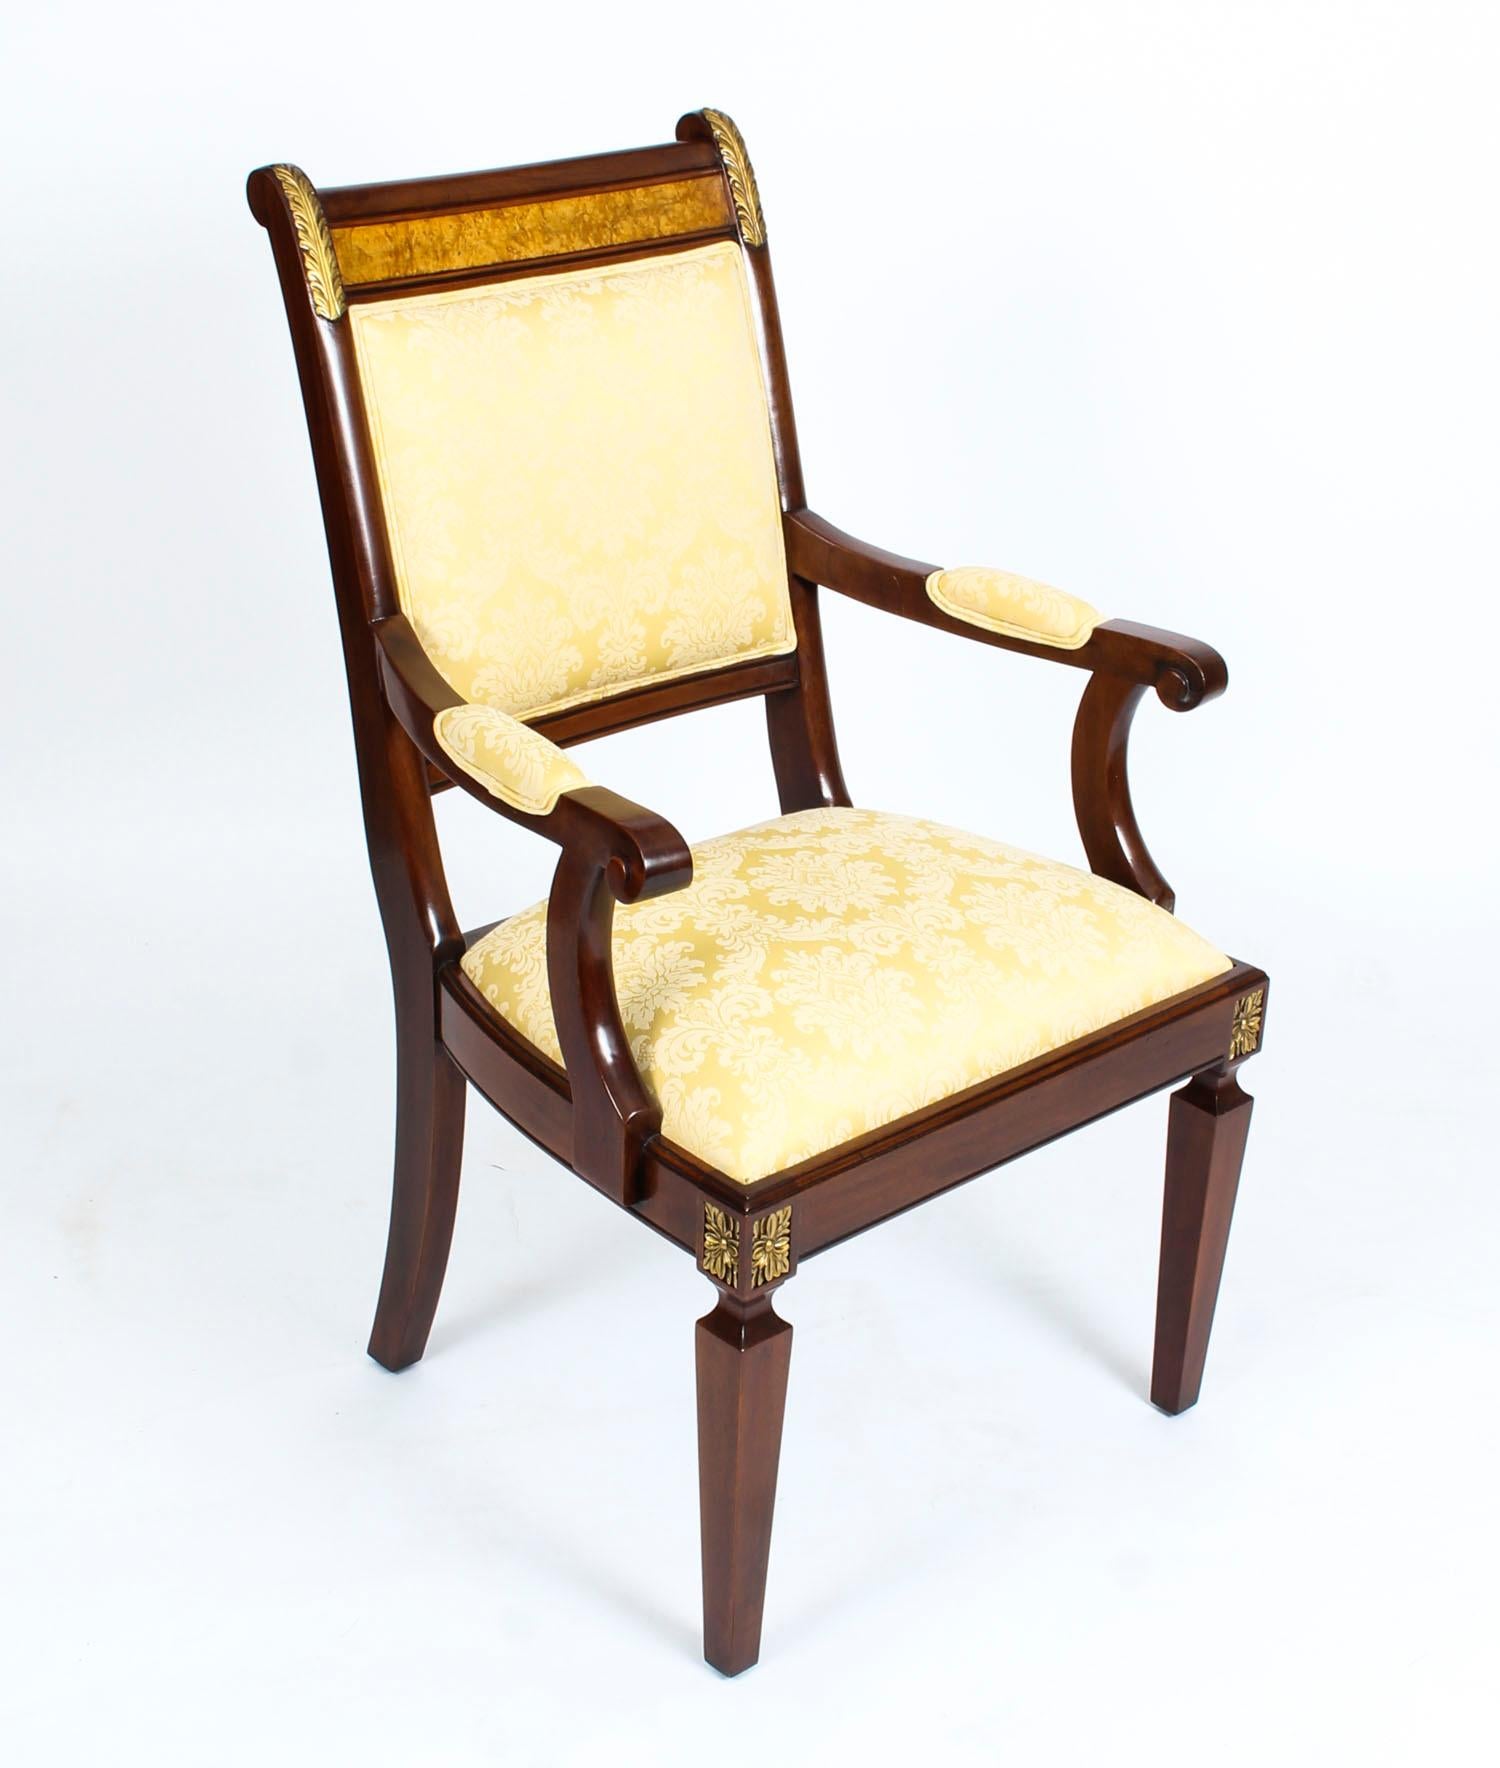 This is a beautiful pair of Empire Revival mahogany armchairs by the renowned cabinet maker, Charles Barr and dating from the late 20th century. 

The mahogany is a beautiful rich colour and has been embellished with striking ormolu mounts and